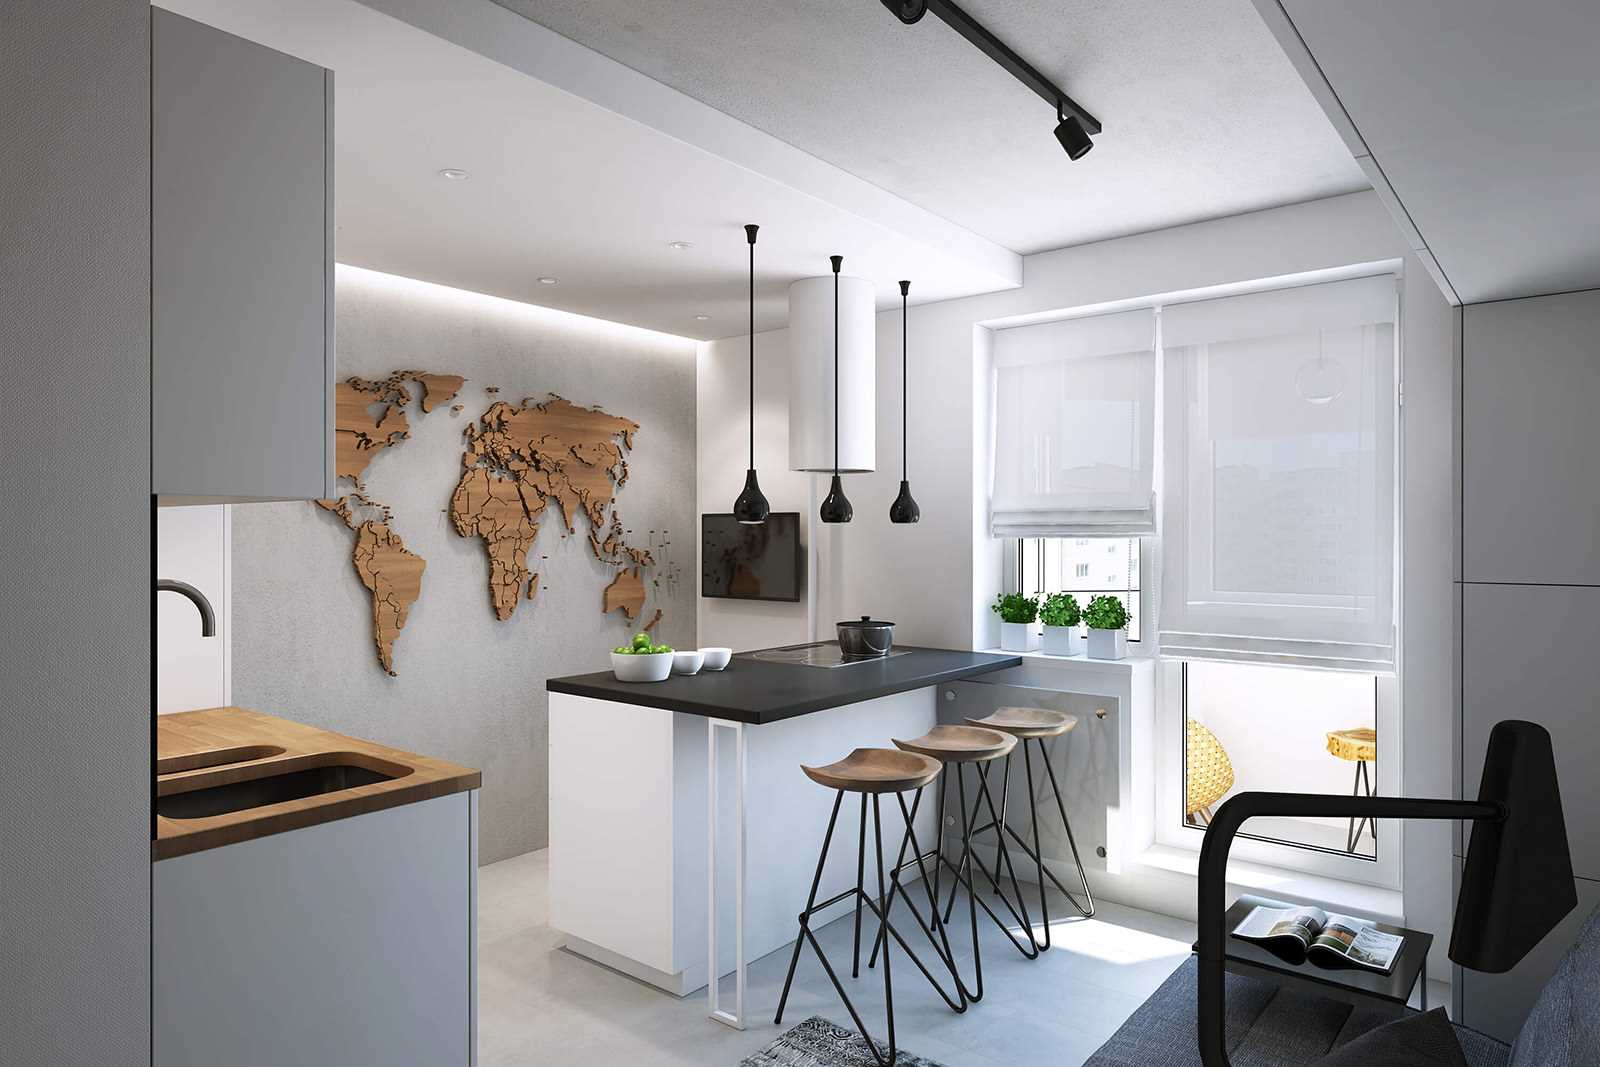 the idea of ​​an unusual interior of the kitchen is 14 sq.m